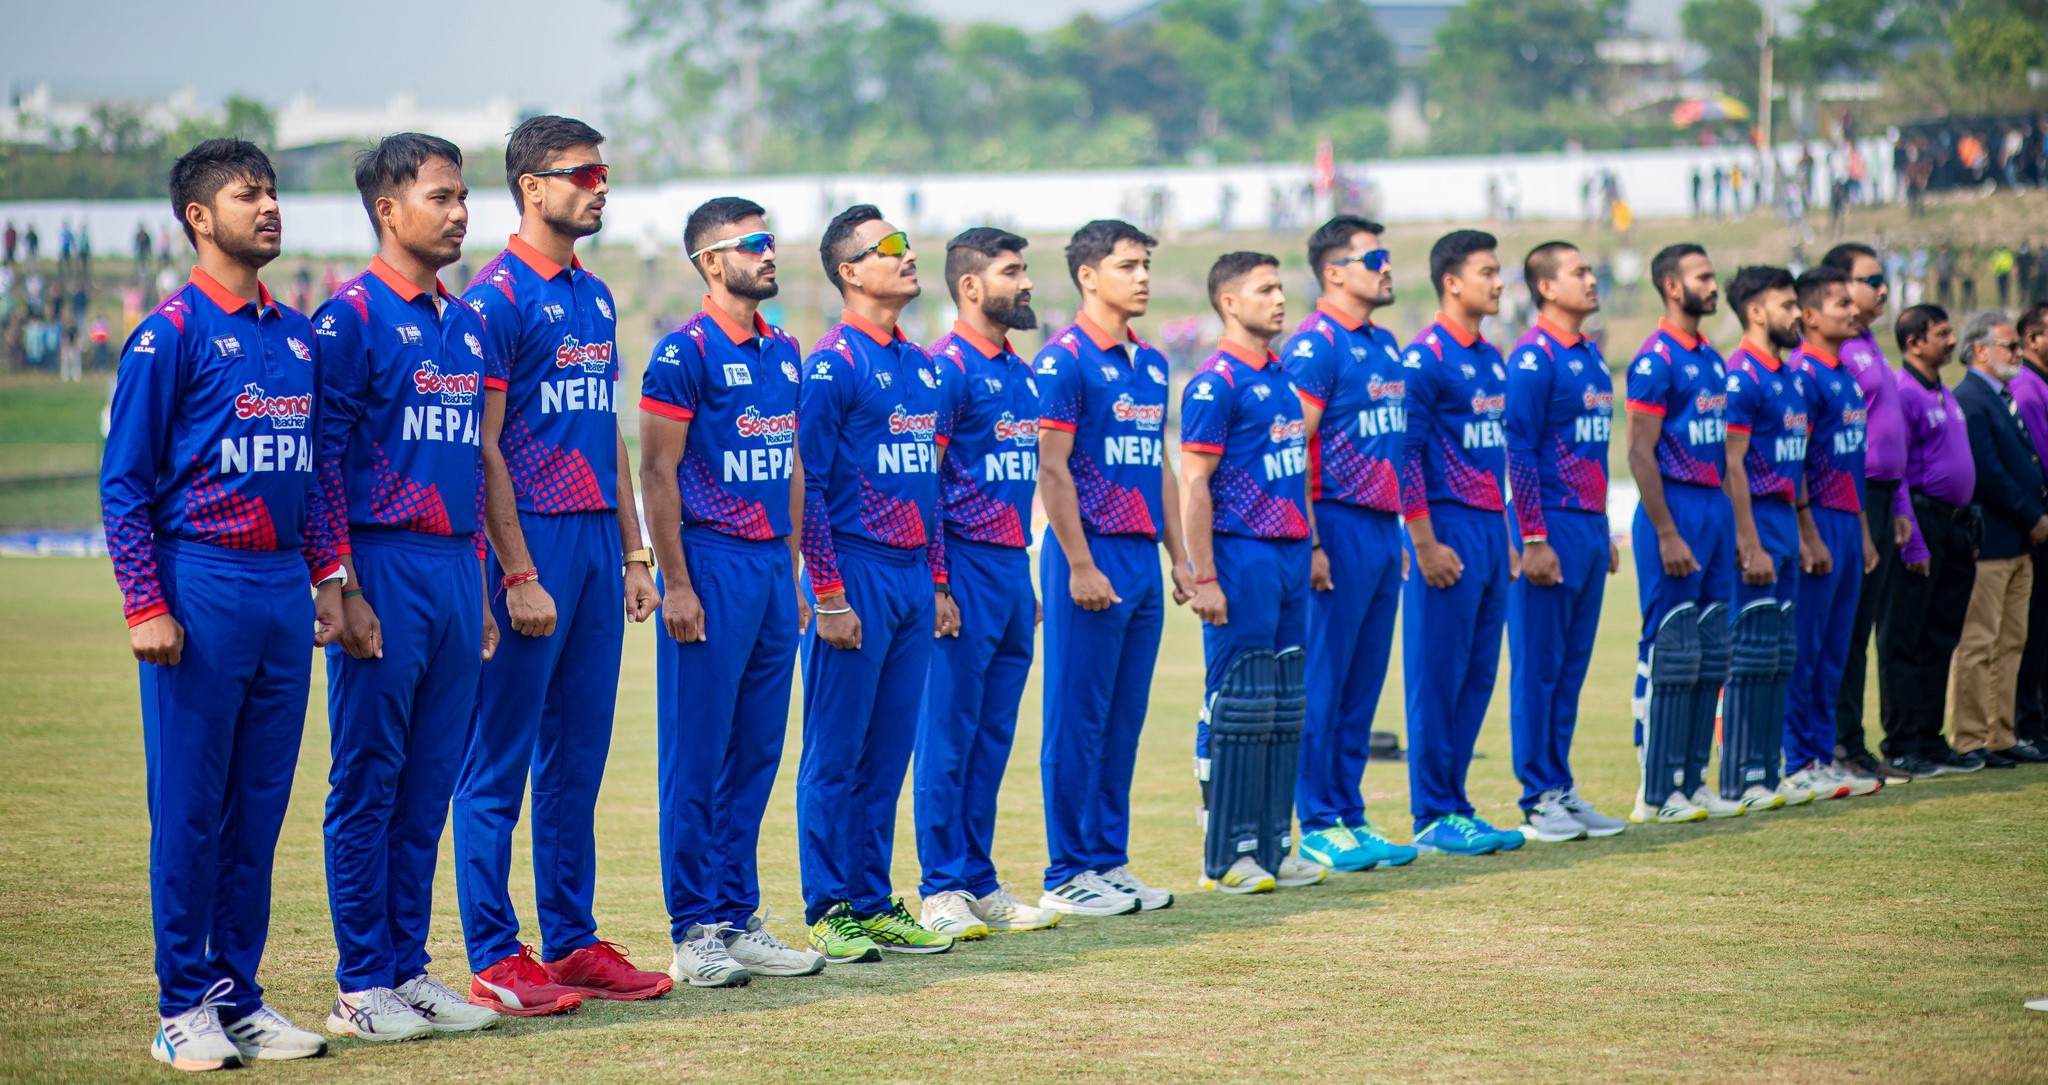 Nepal facing the Netherlands today, pressure to win to reach the Super Six